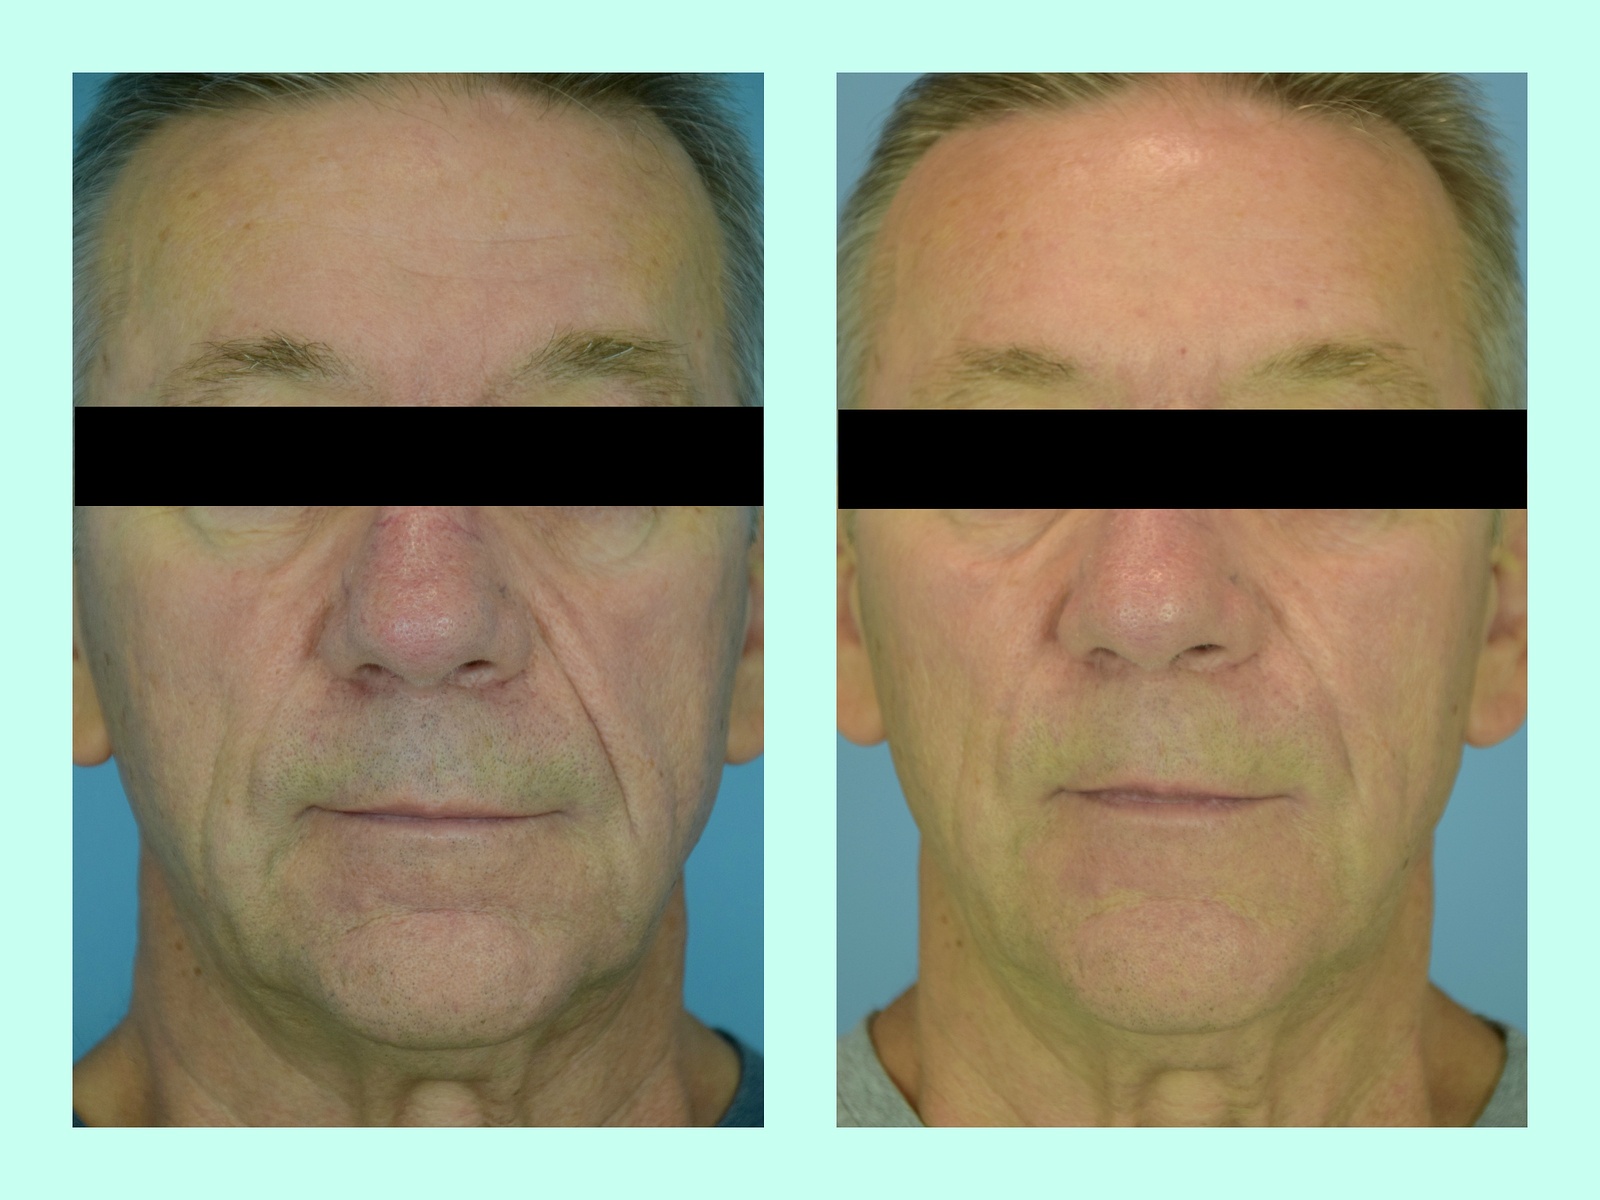 Male face, before and after Liquid Facelift treatment, front view